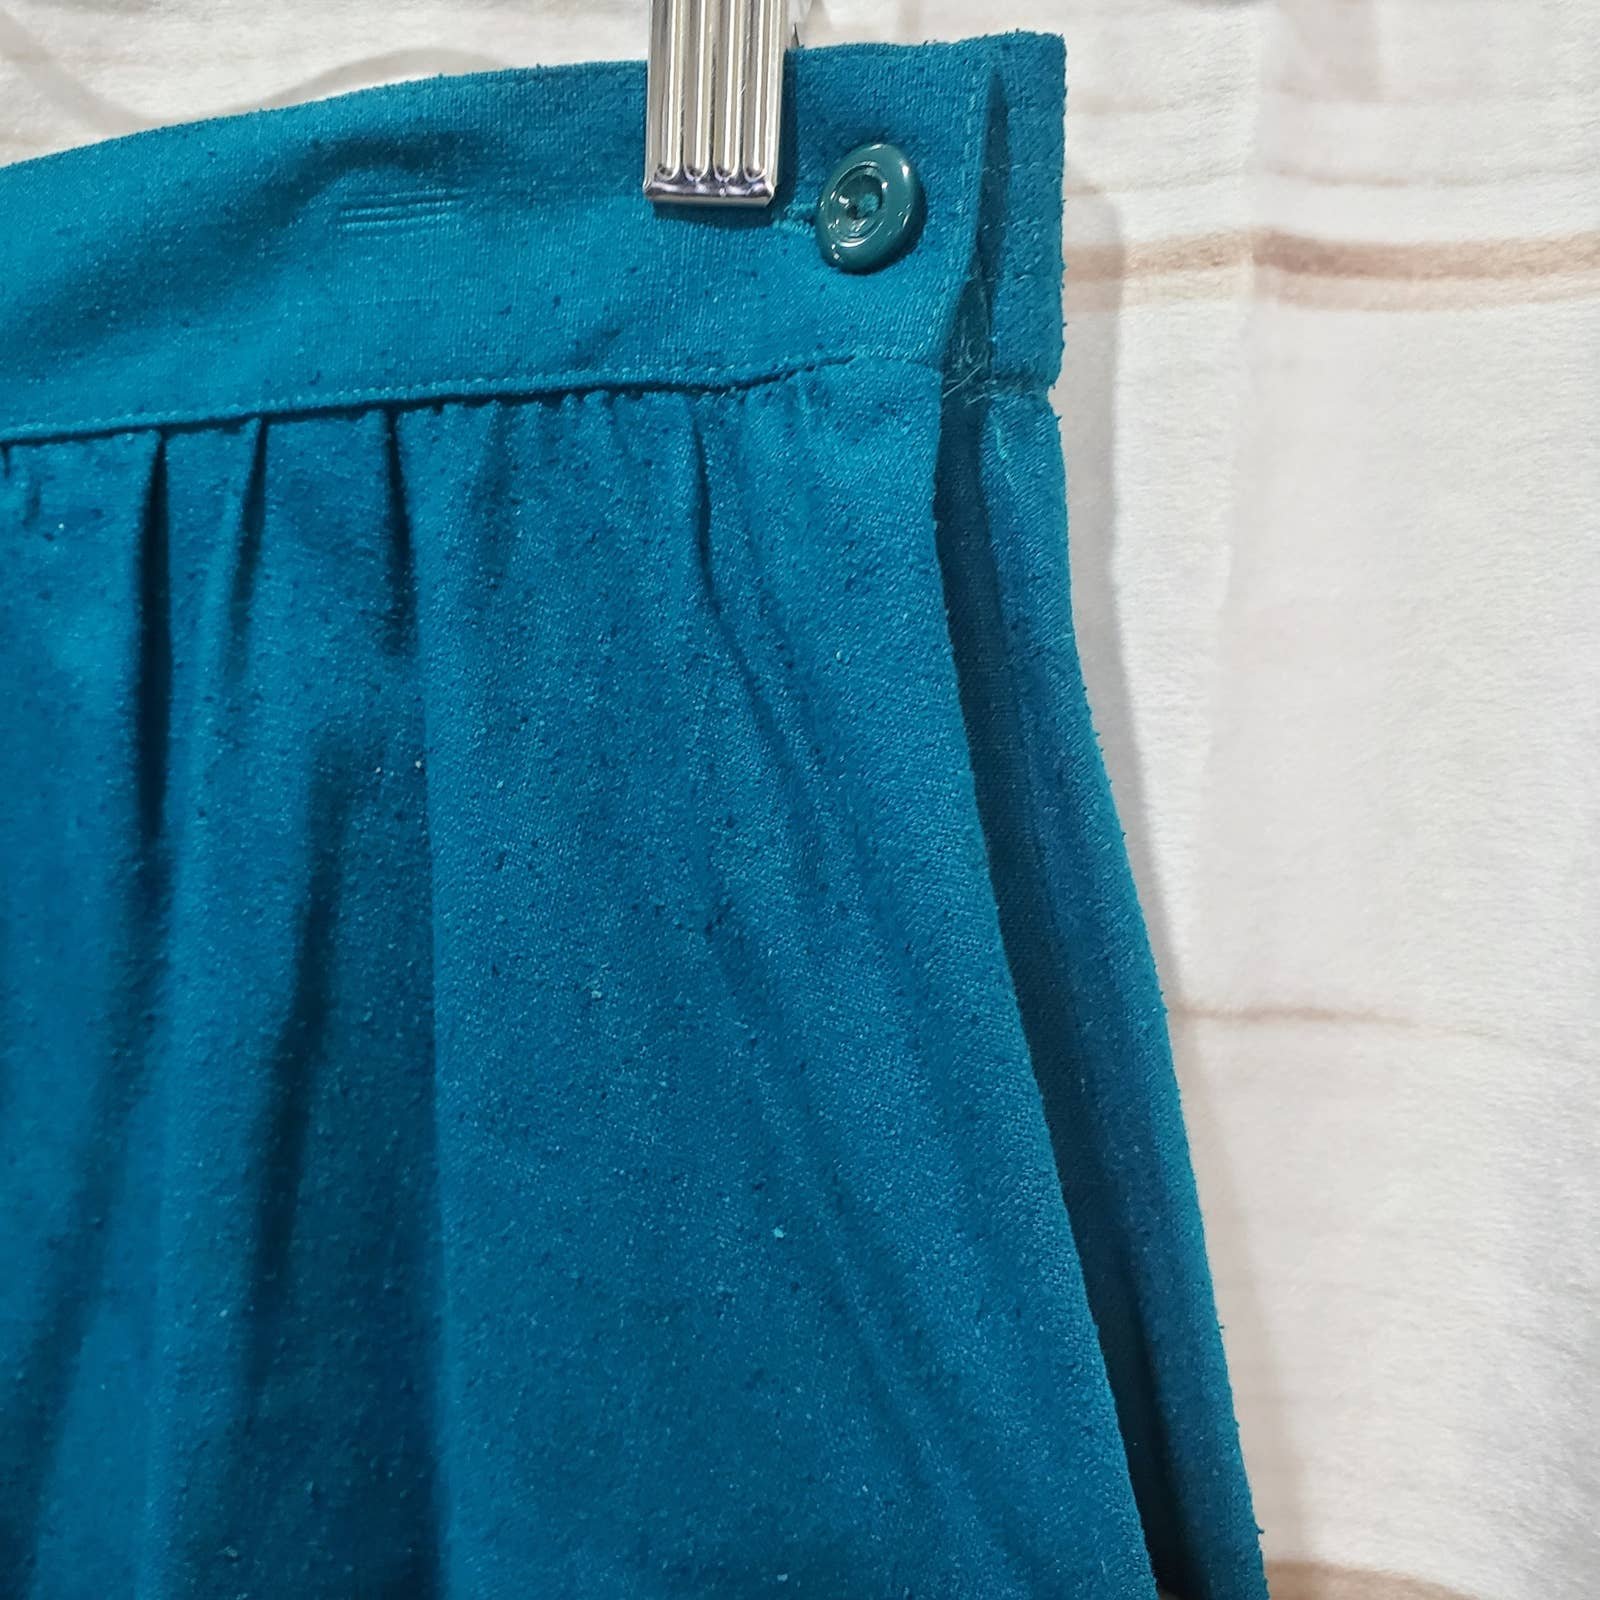 Great George Georgiou Skirt Womens Large Blue Silk Maxi Vintage 90s Pleated Pockets omotLCfyD outlet online shop